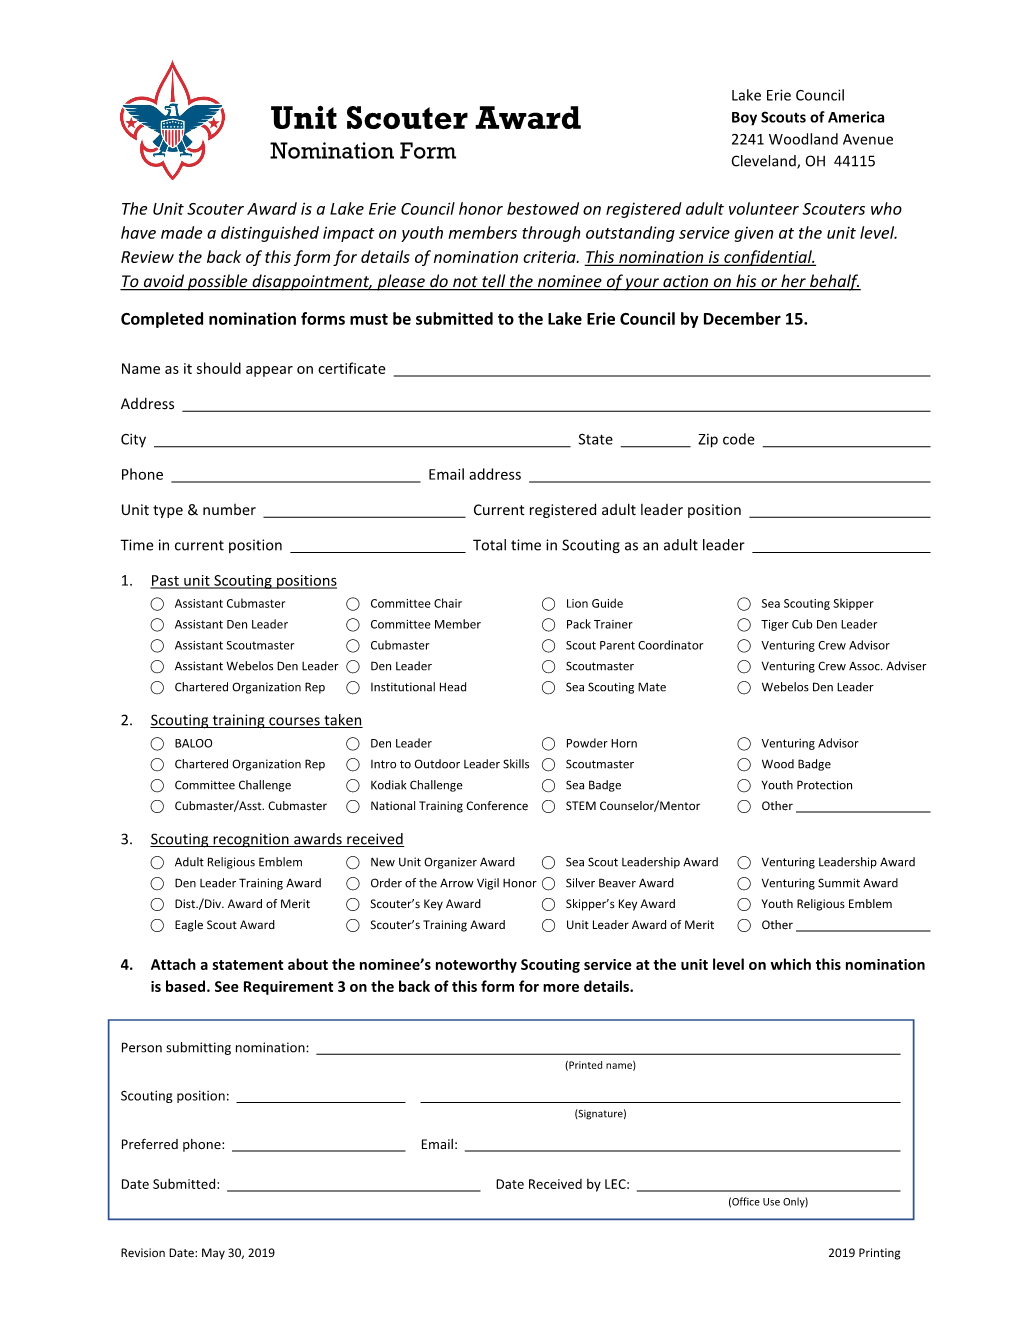 Unit Scouter Award Boy Scouts of America Nomination Form 2241 Woodland Avenue Cleveland, OH 44115